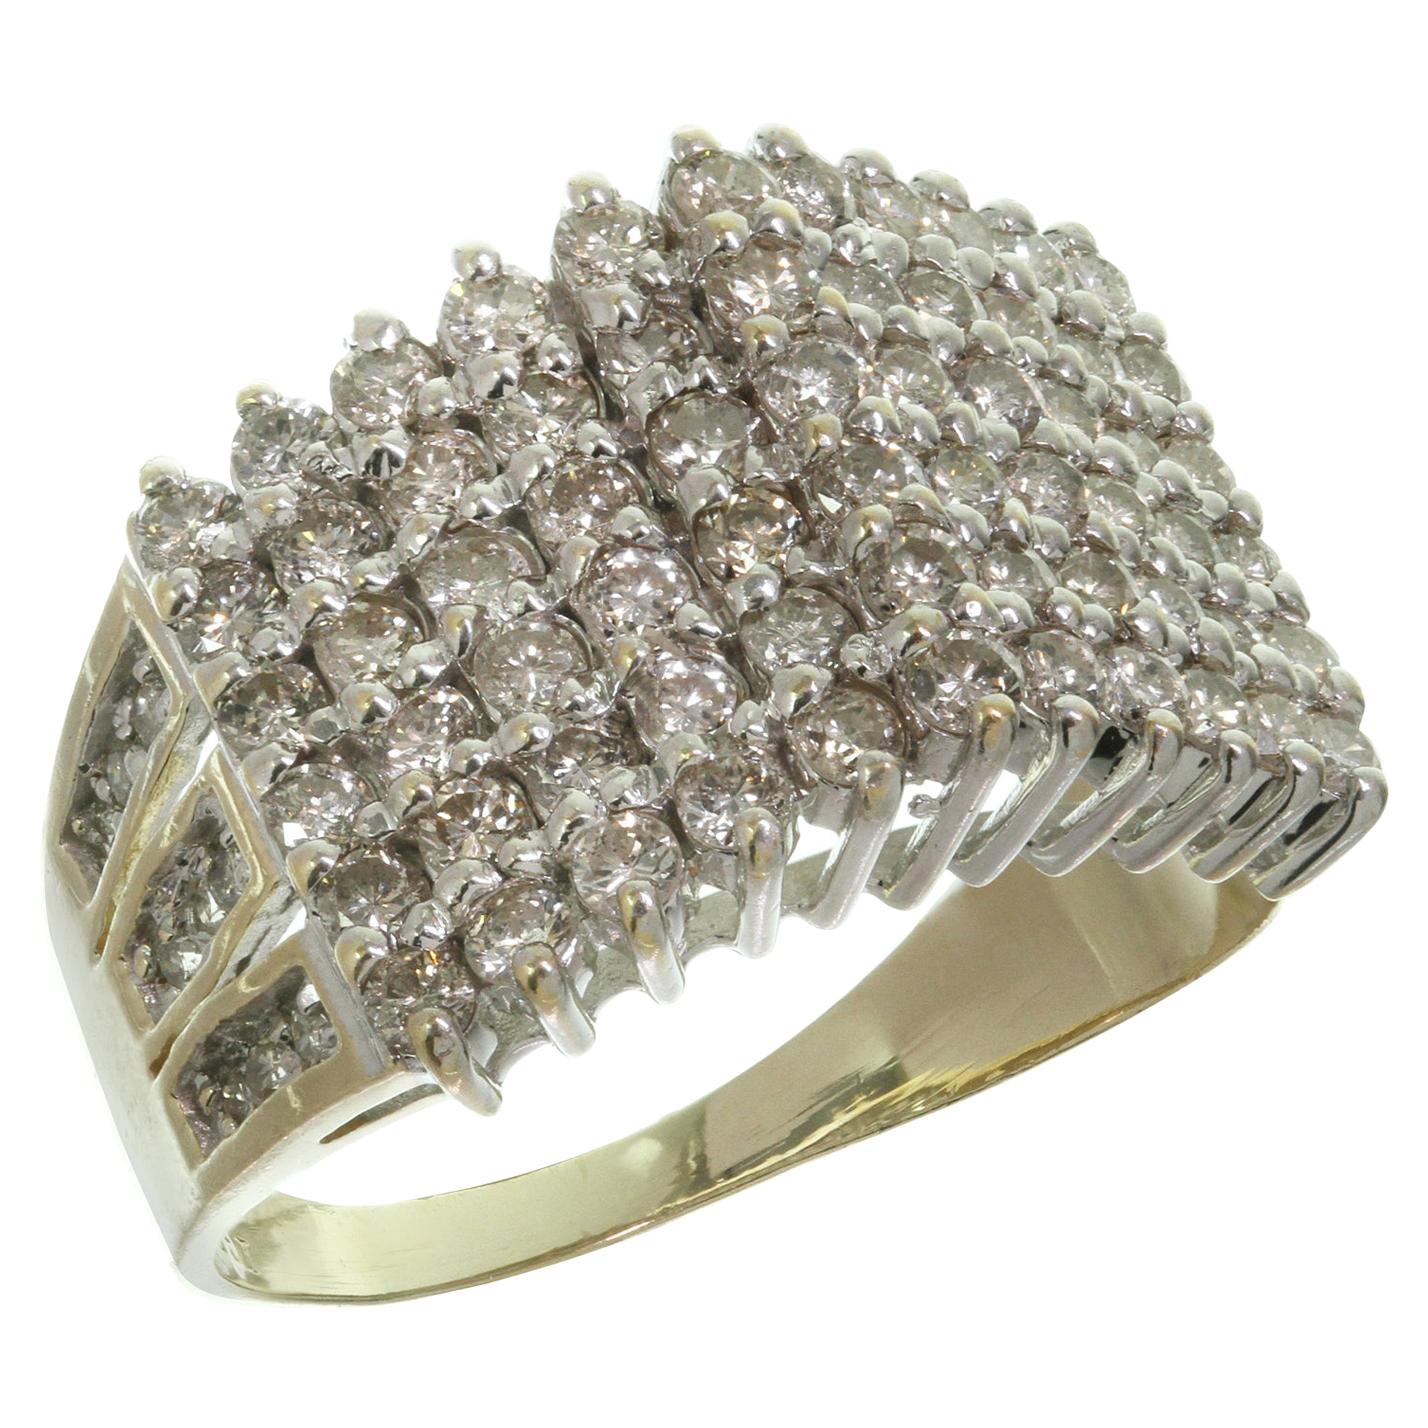 Gold and Diamond Pyramid Ring – Calista West